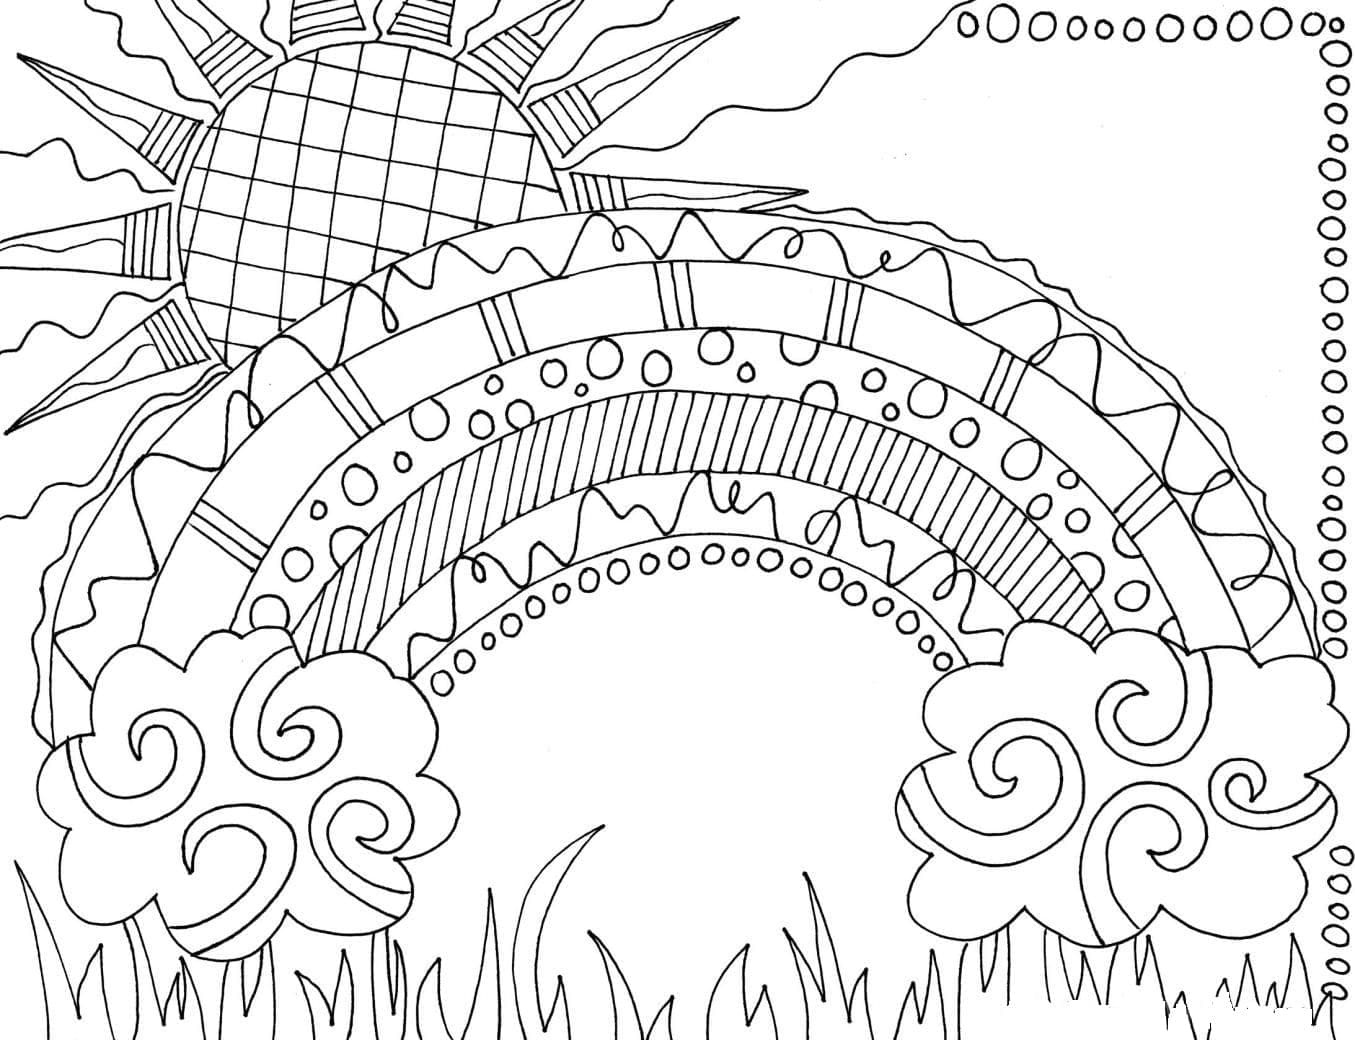 Hard and Difficult to Color Adult Rainbow Coloring Pages for Stress ...